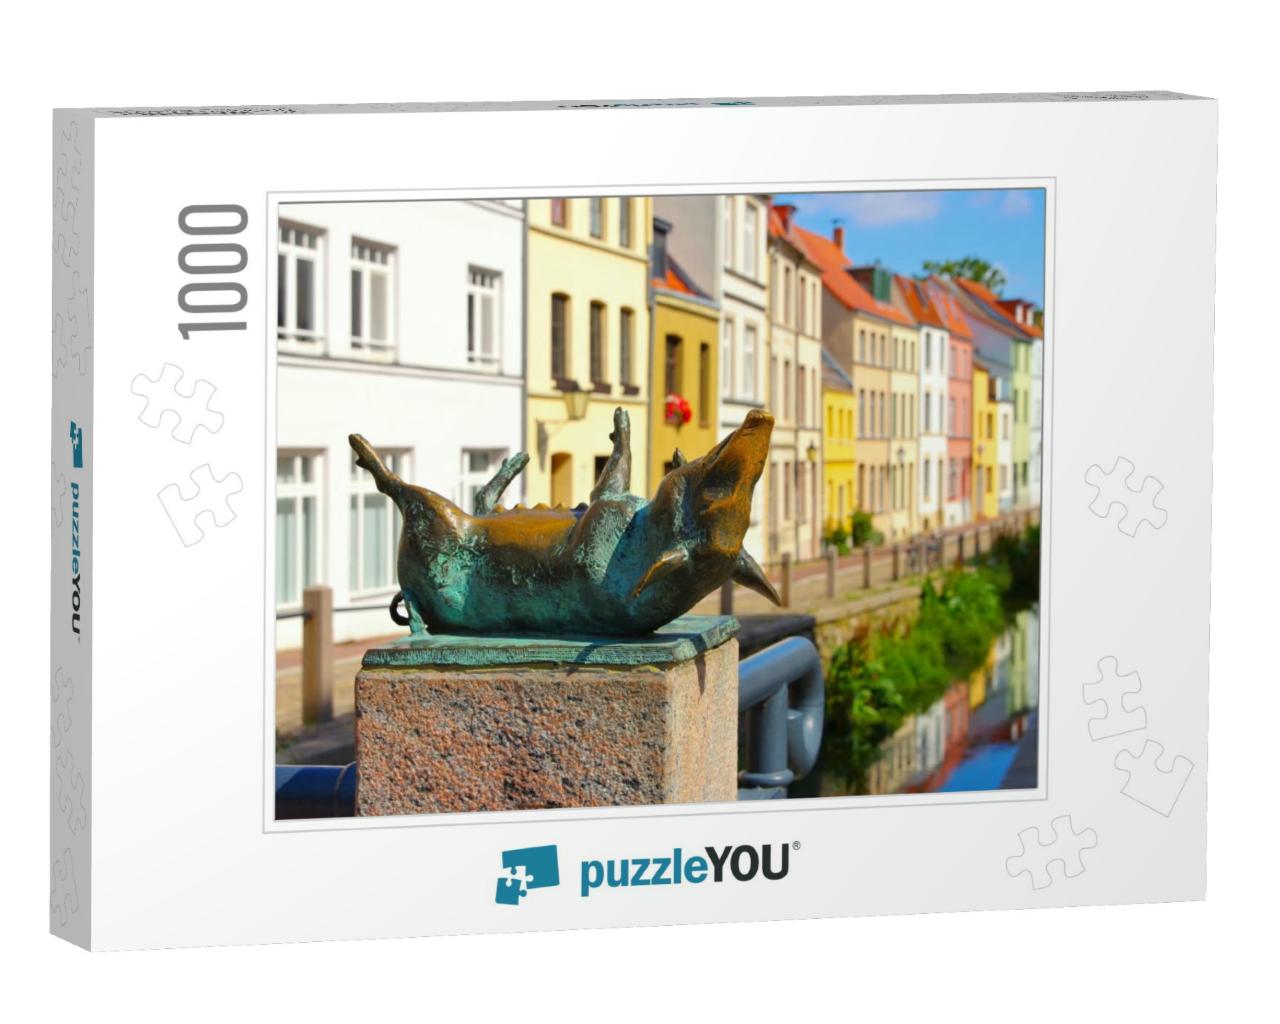 The Old Town Wismar in Northern Germany, the Pig Bridge... Jigsaw Puzzle with 1000 pieces